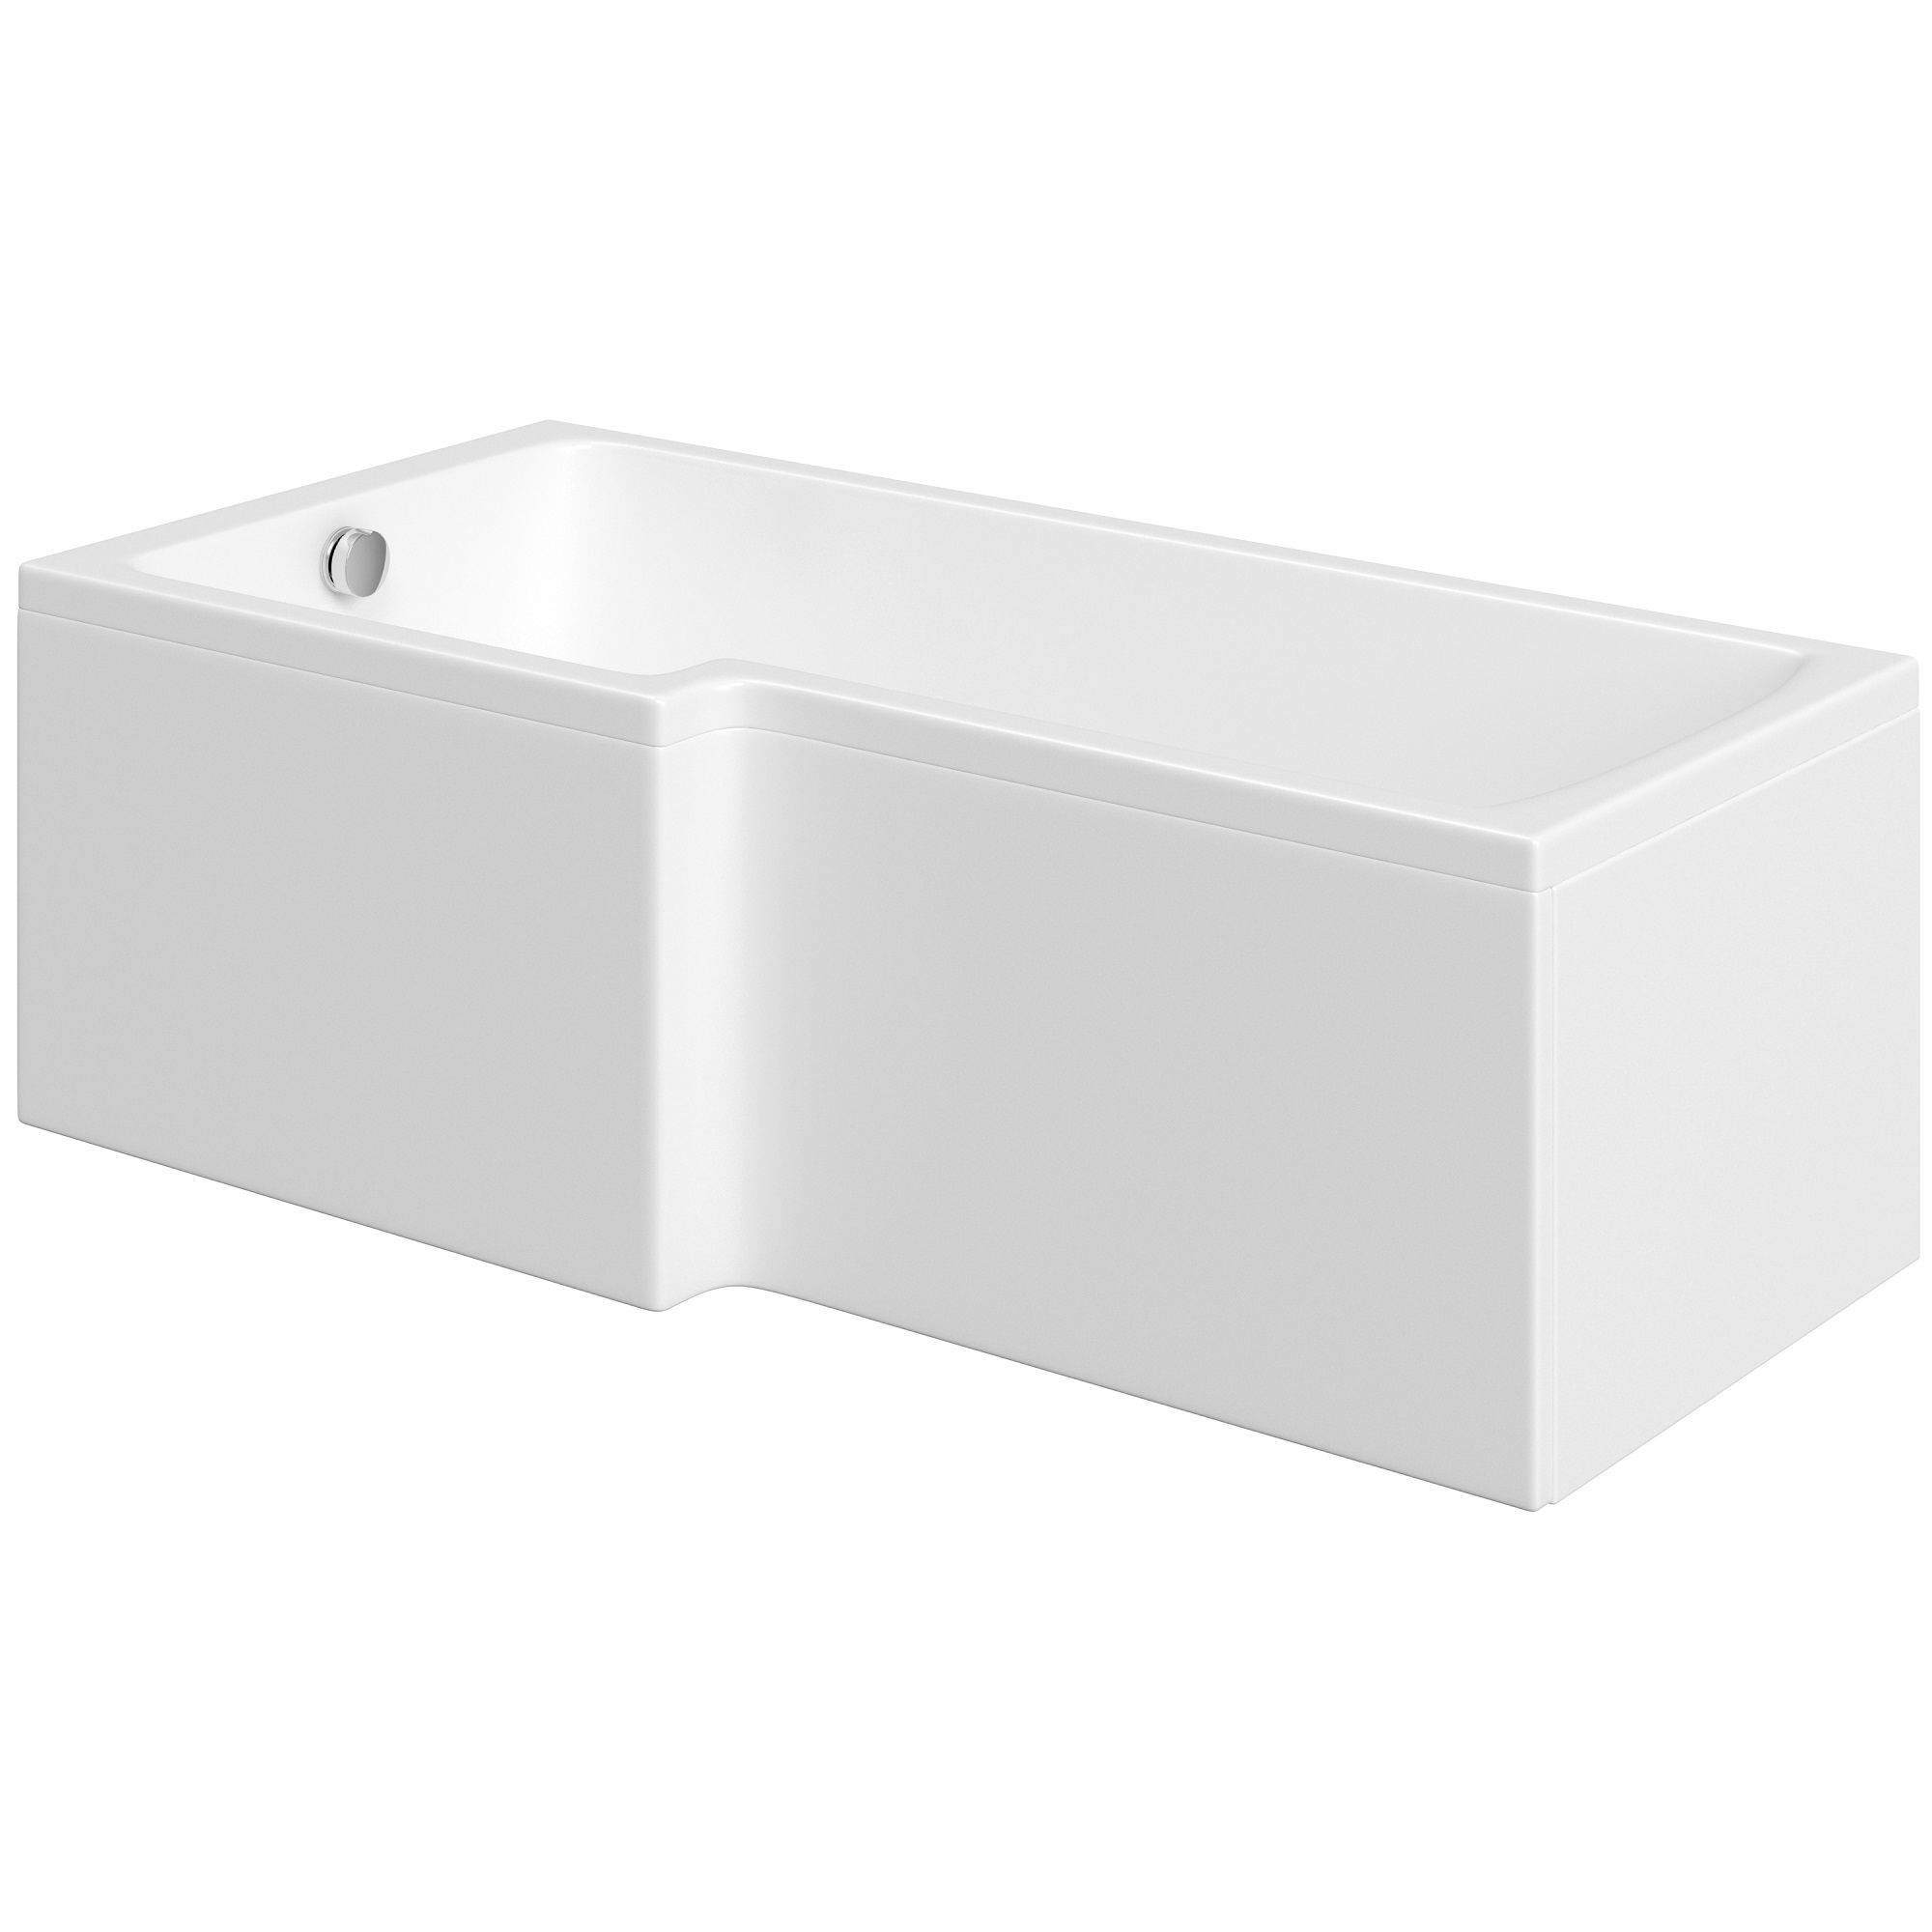 Cooke & Lewis Solarna White Acrylic L-shaped Left-handed Shower Bath (L)1500mm (W)850mm